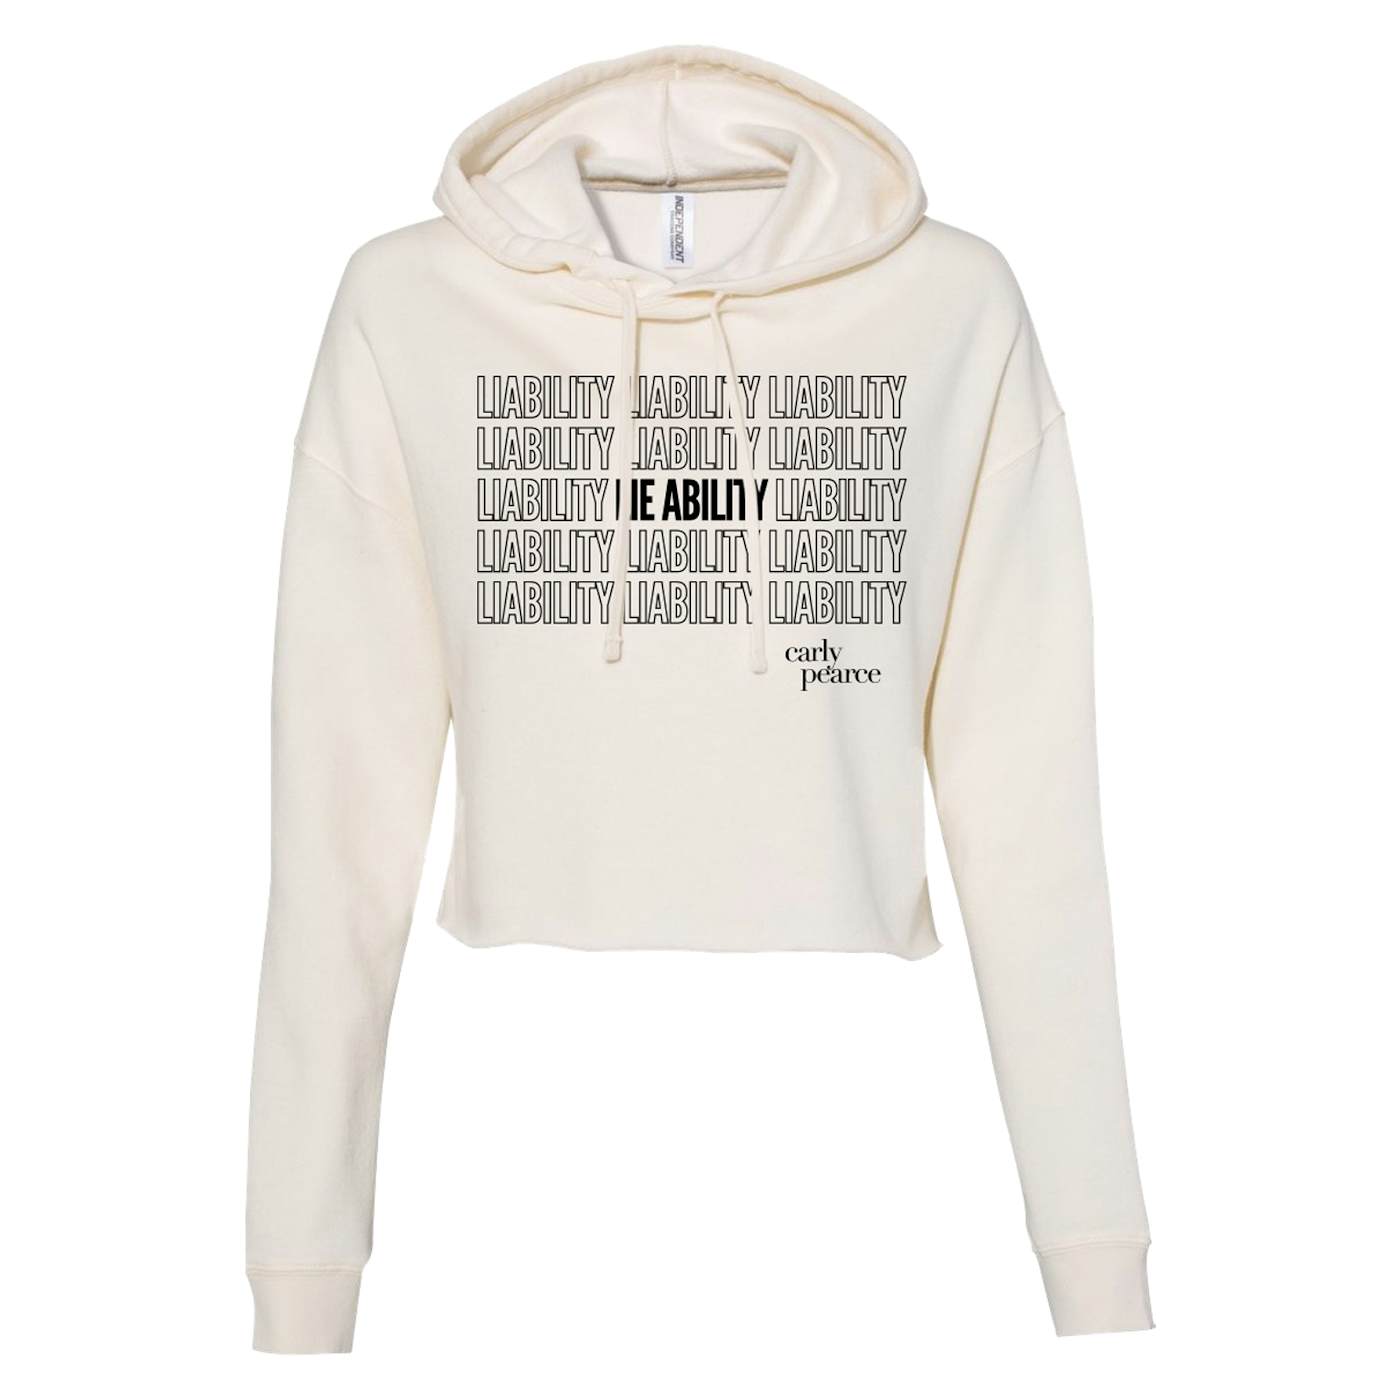 Carly Pearce Liability Cropped Hoodie